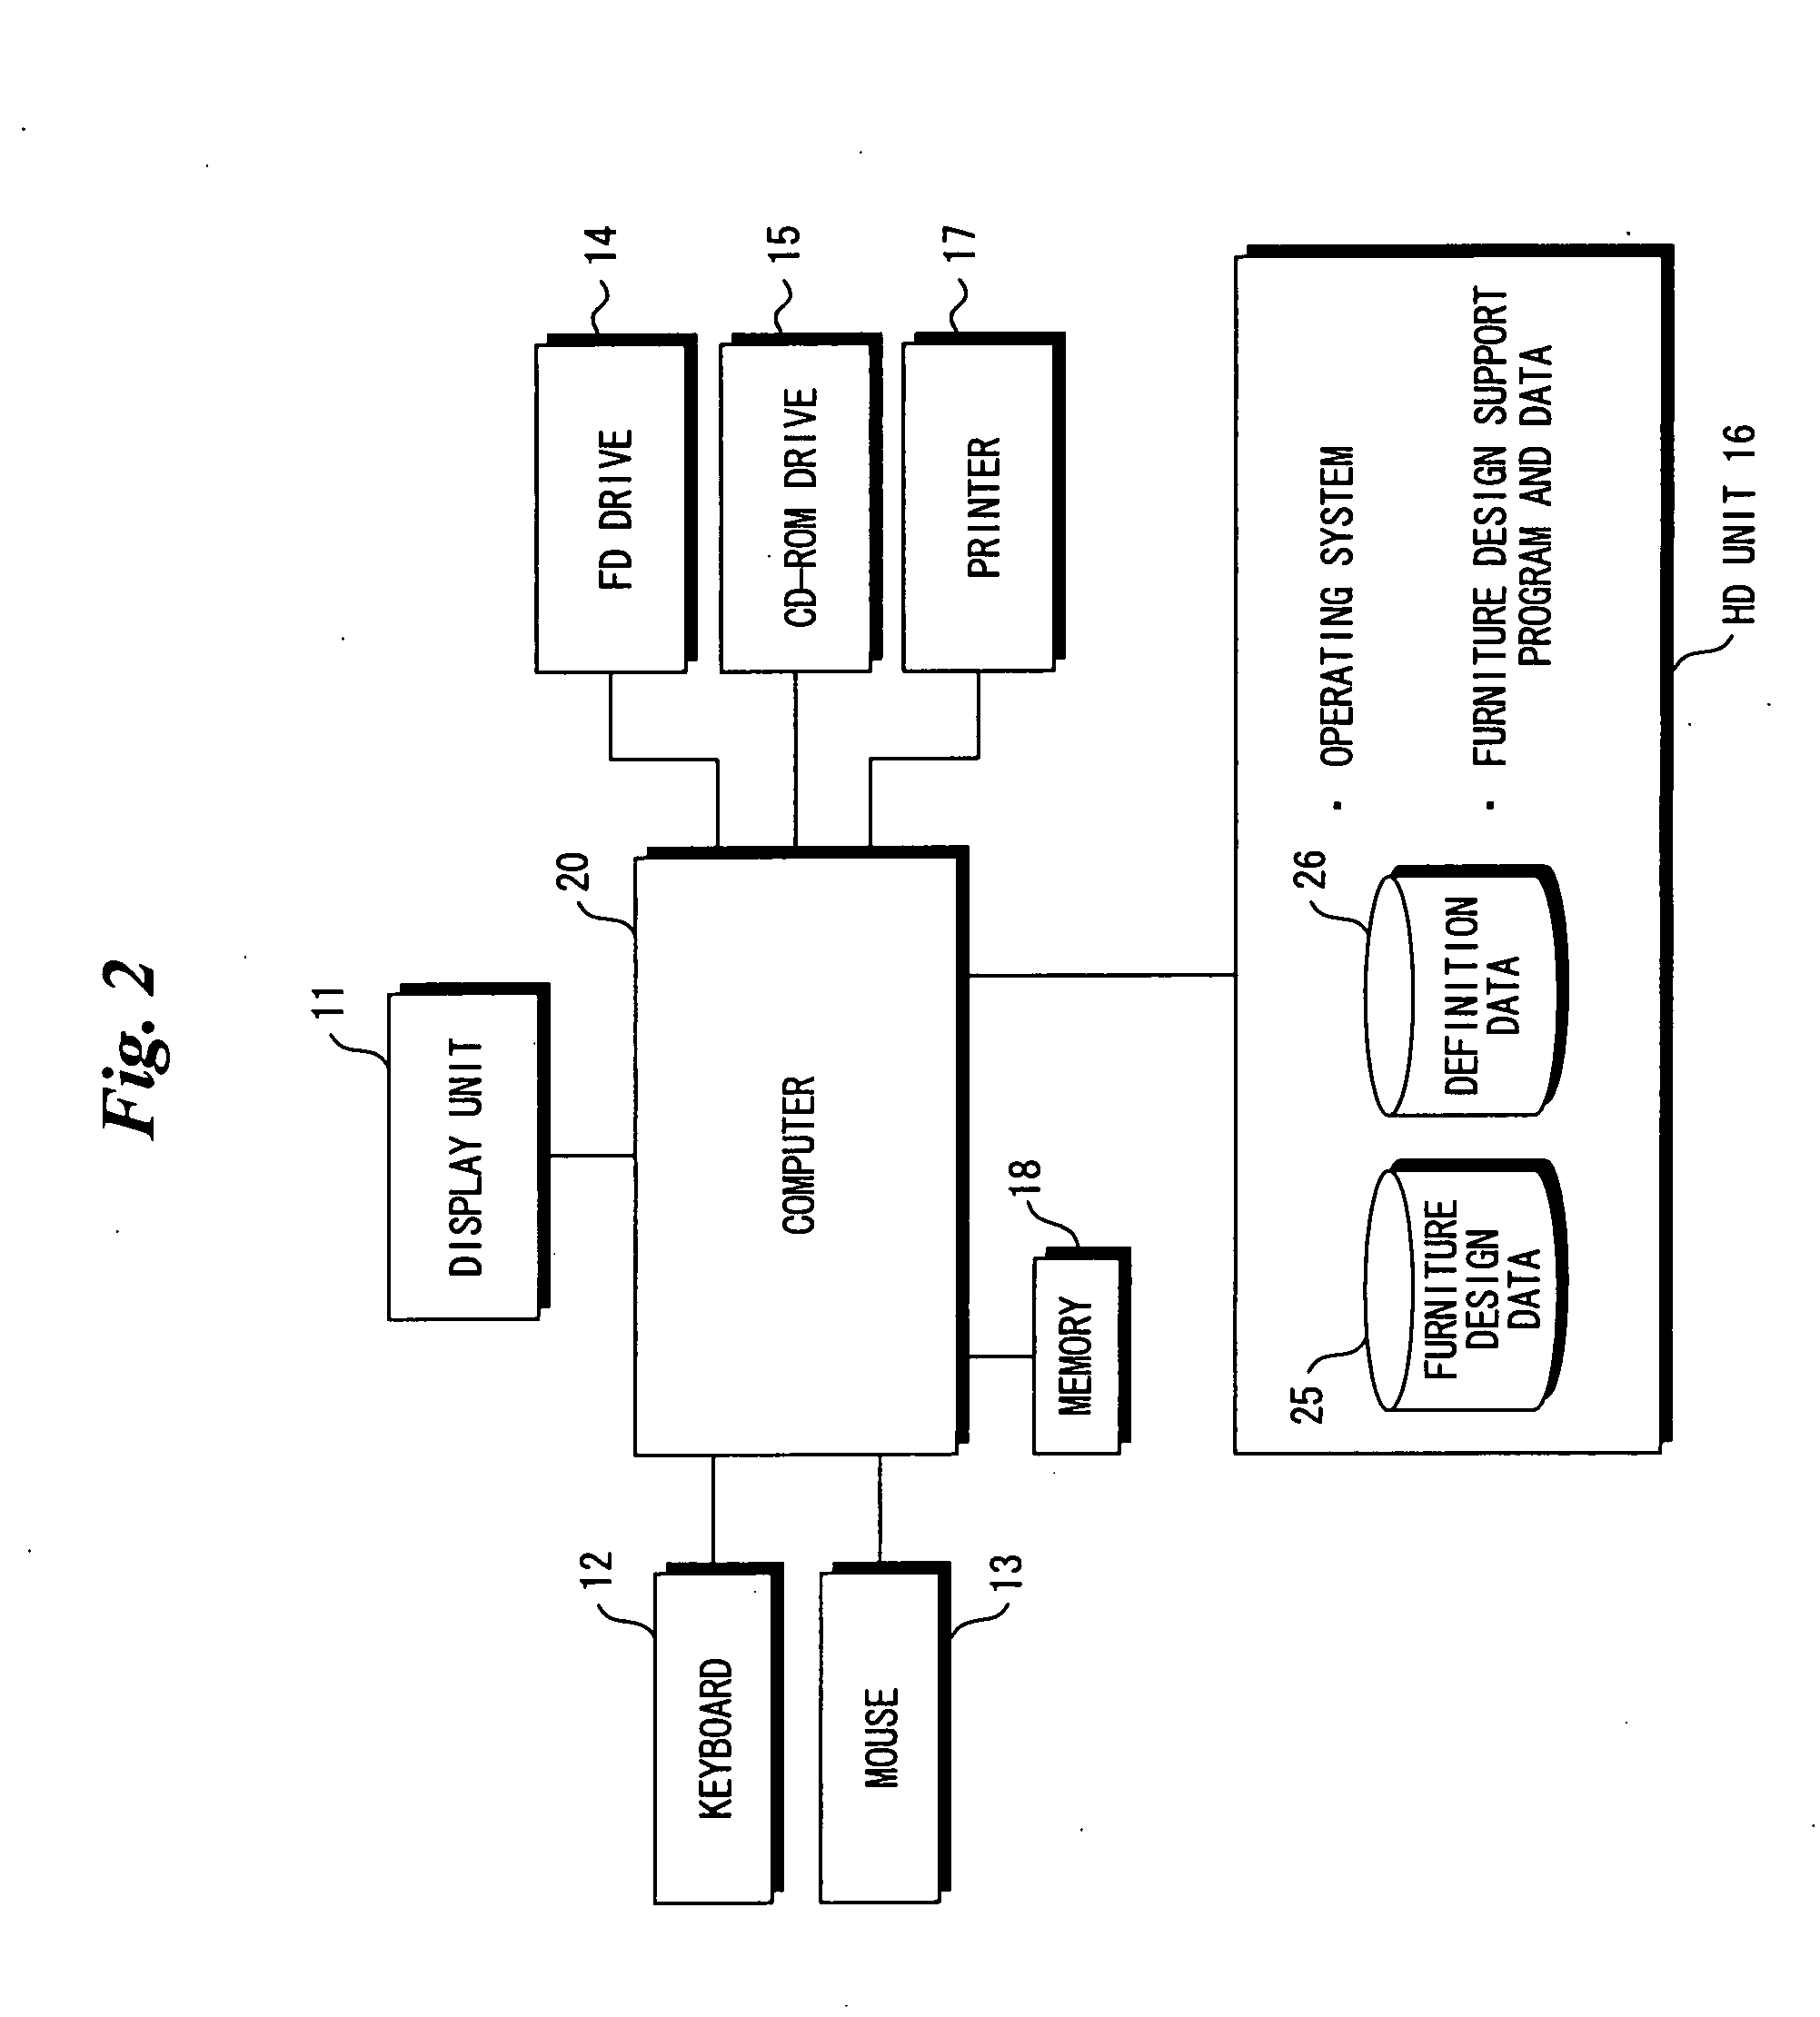 Article Design Support System and Method of Controlling Same